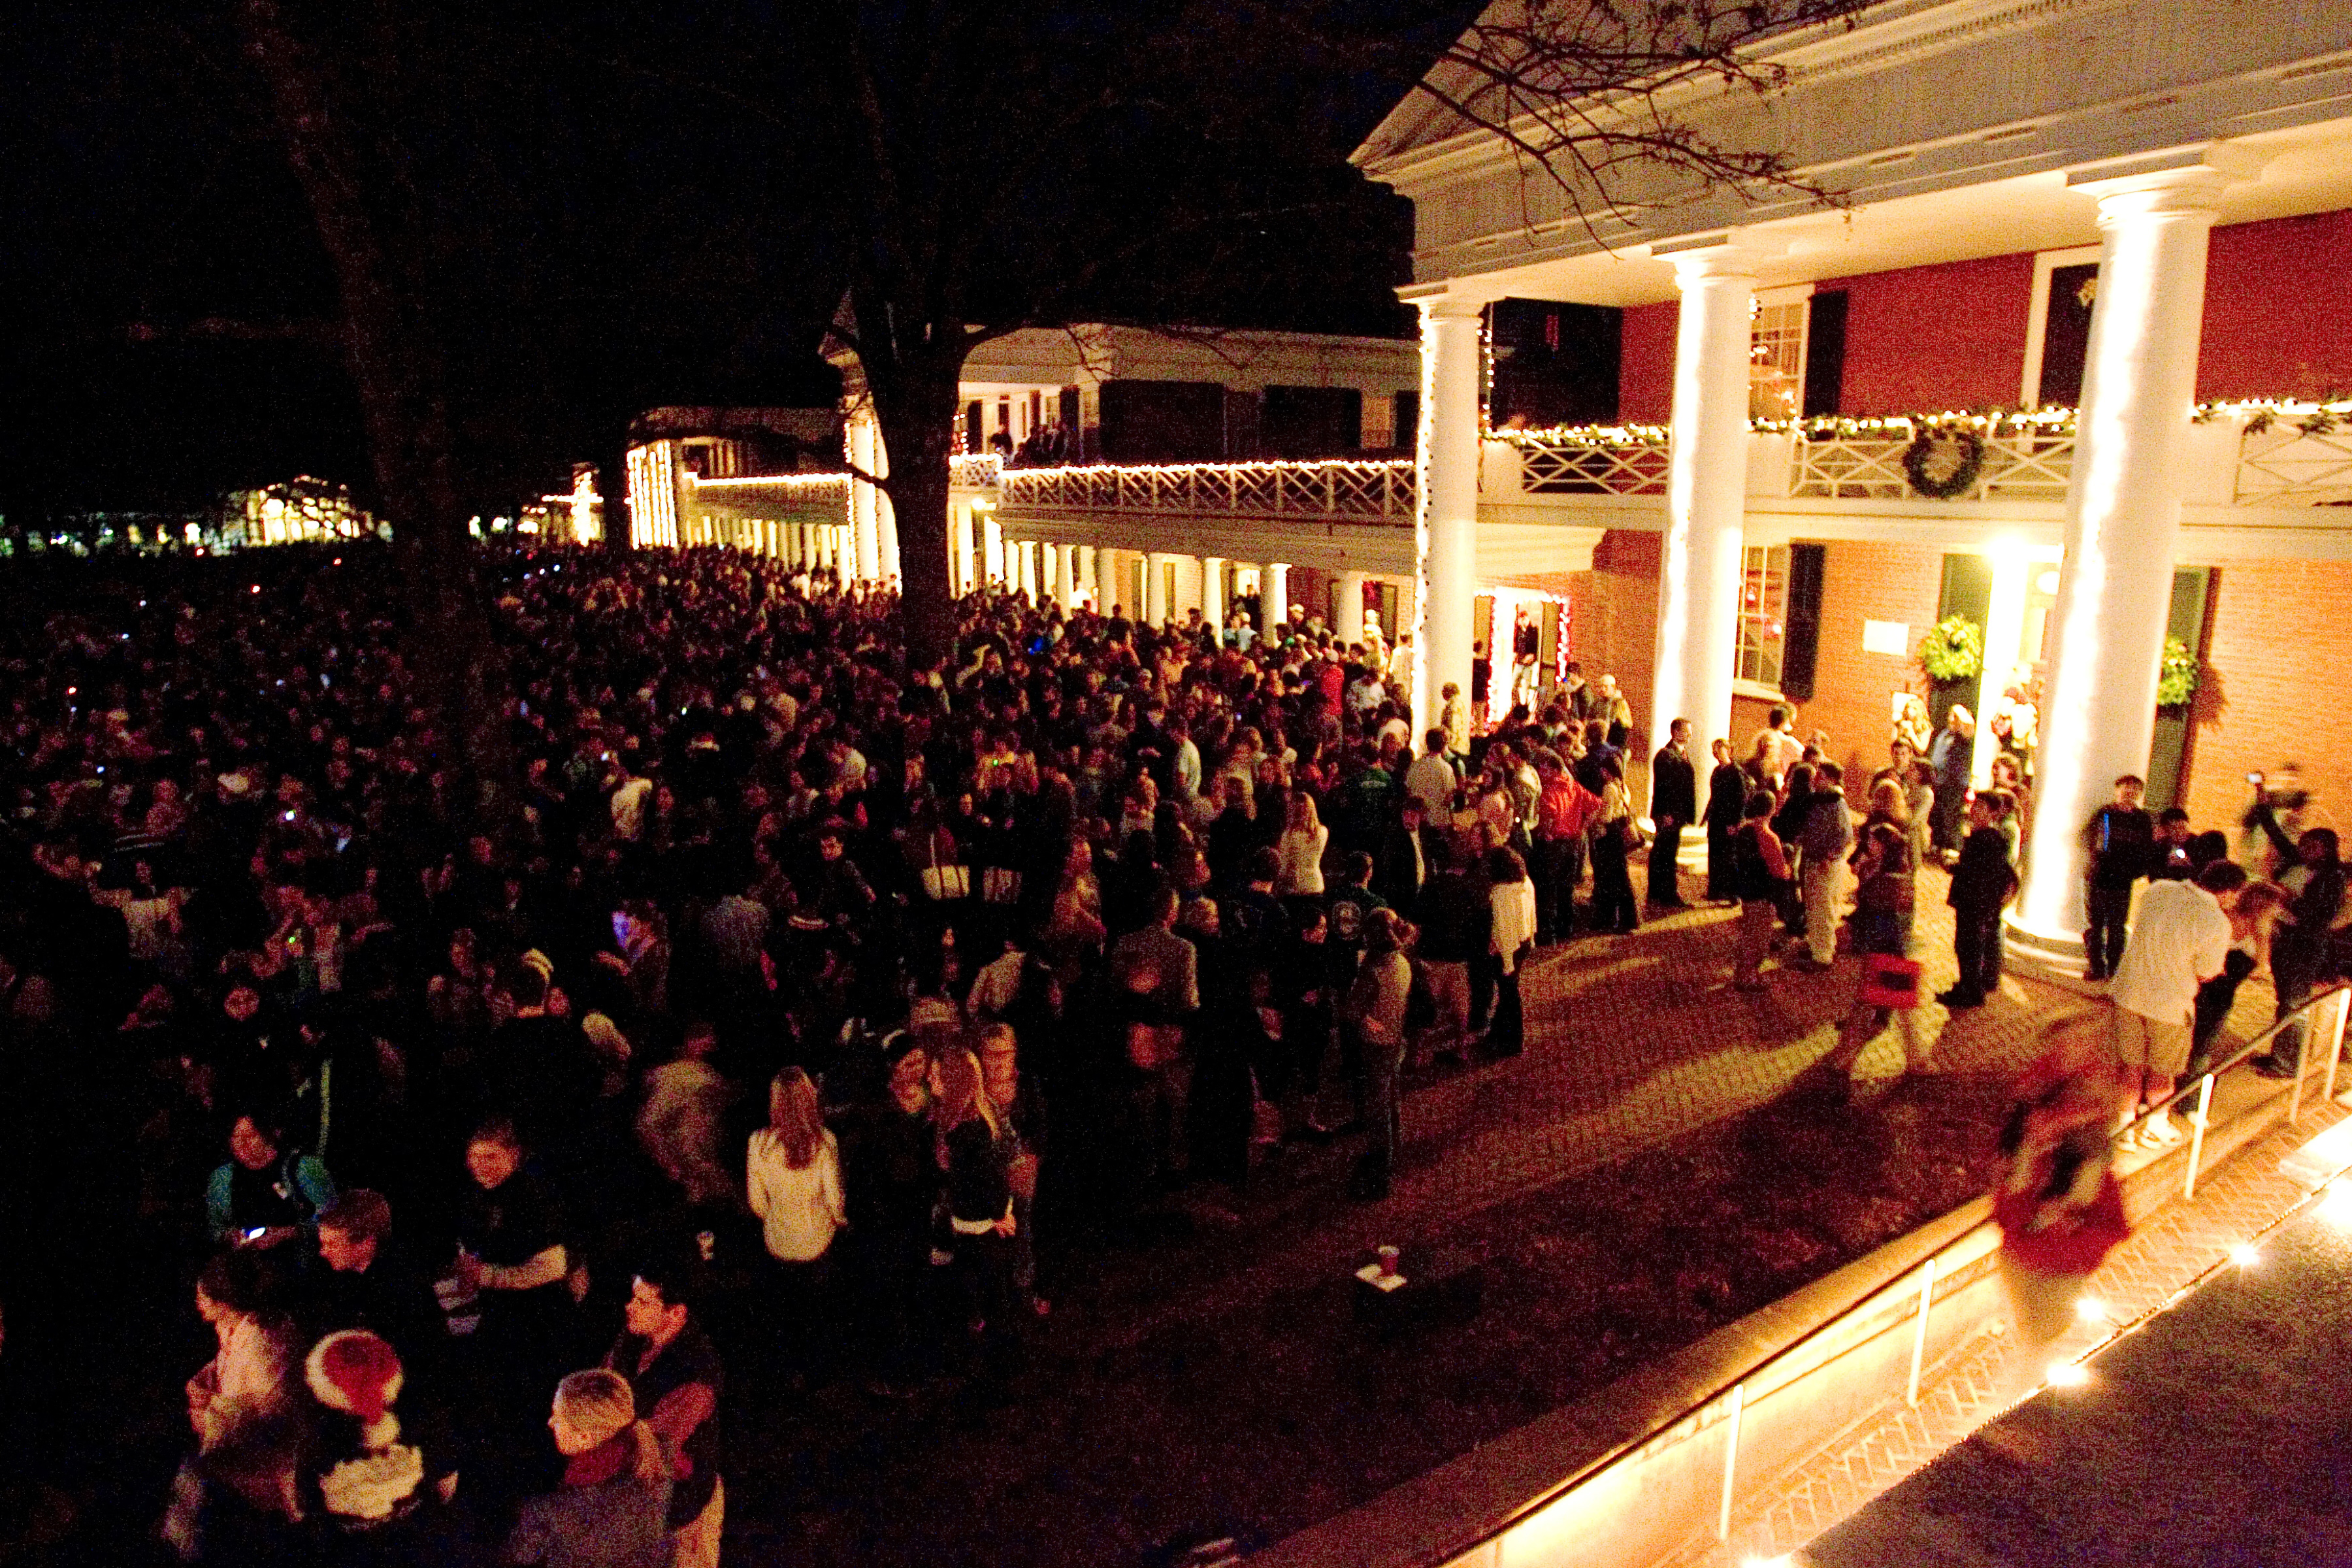 Crowd of people on the lawn at night time with all of the building outlined in white lights